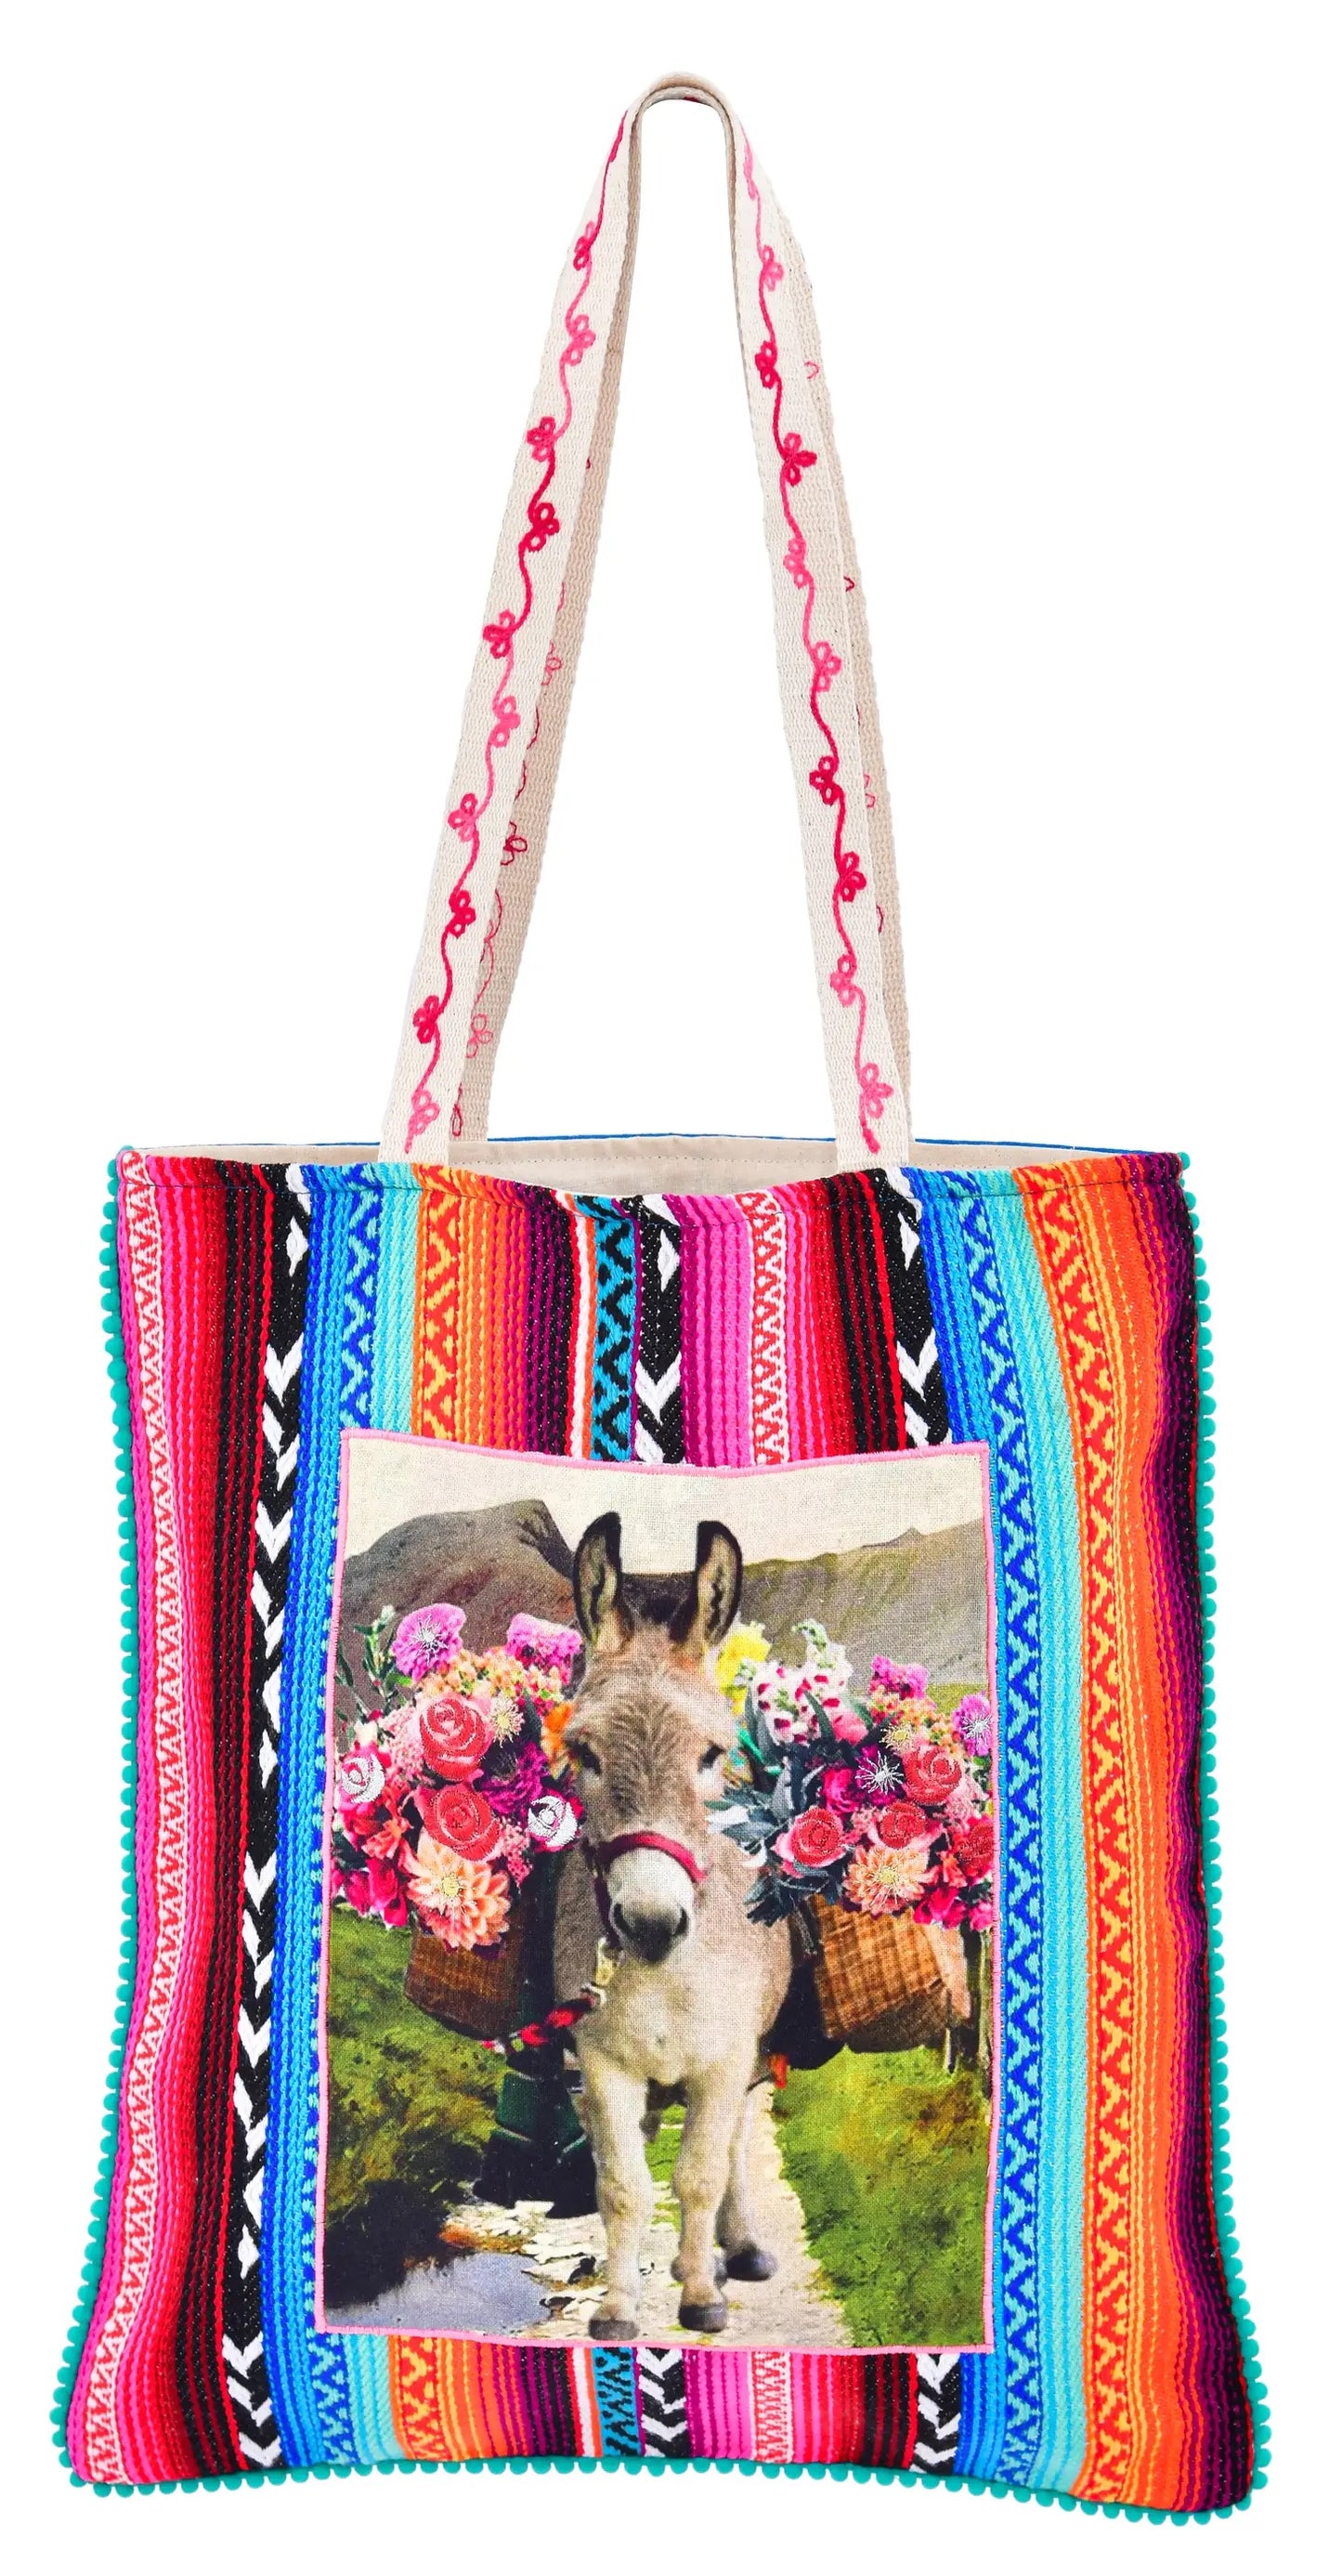 This colorful multicultural tote bag is designed with a drawing of a donkey in the center. The donkey has many flowers and a green mountain behind it.